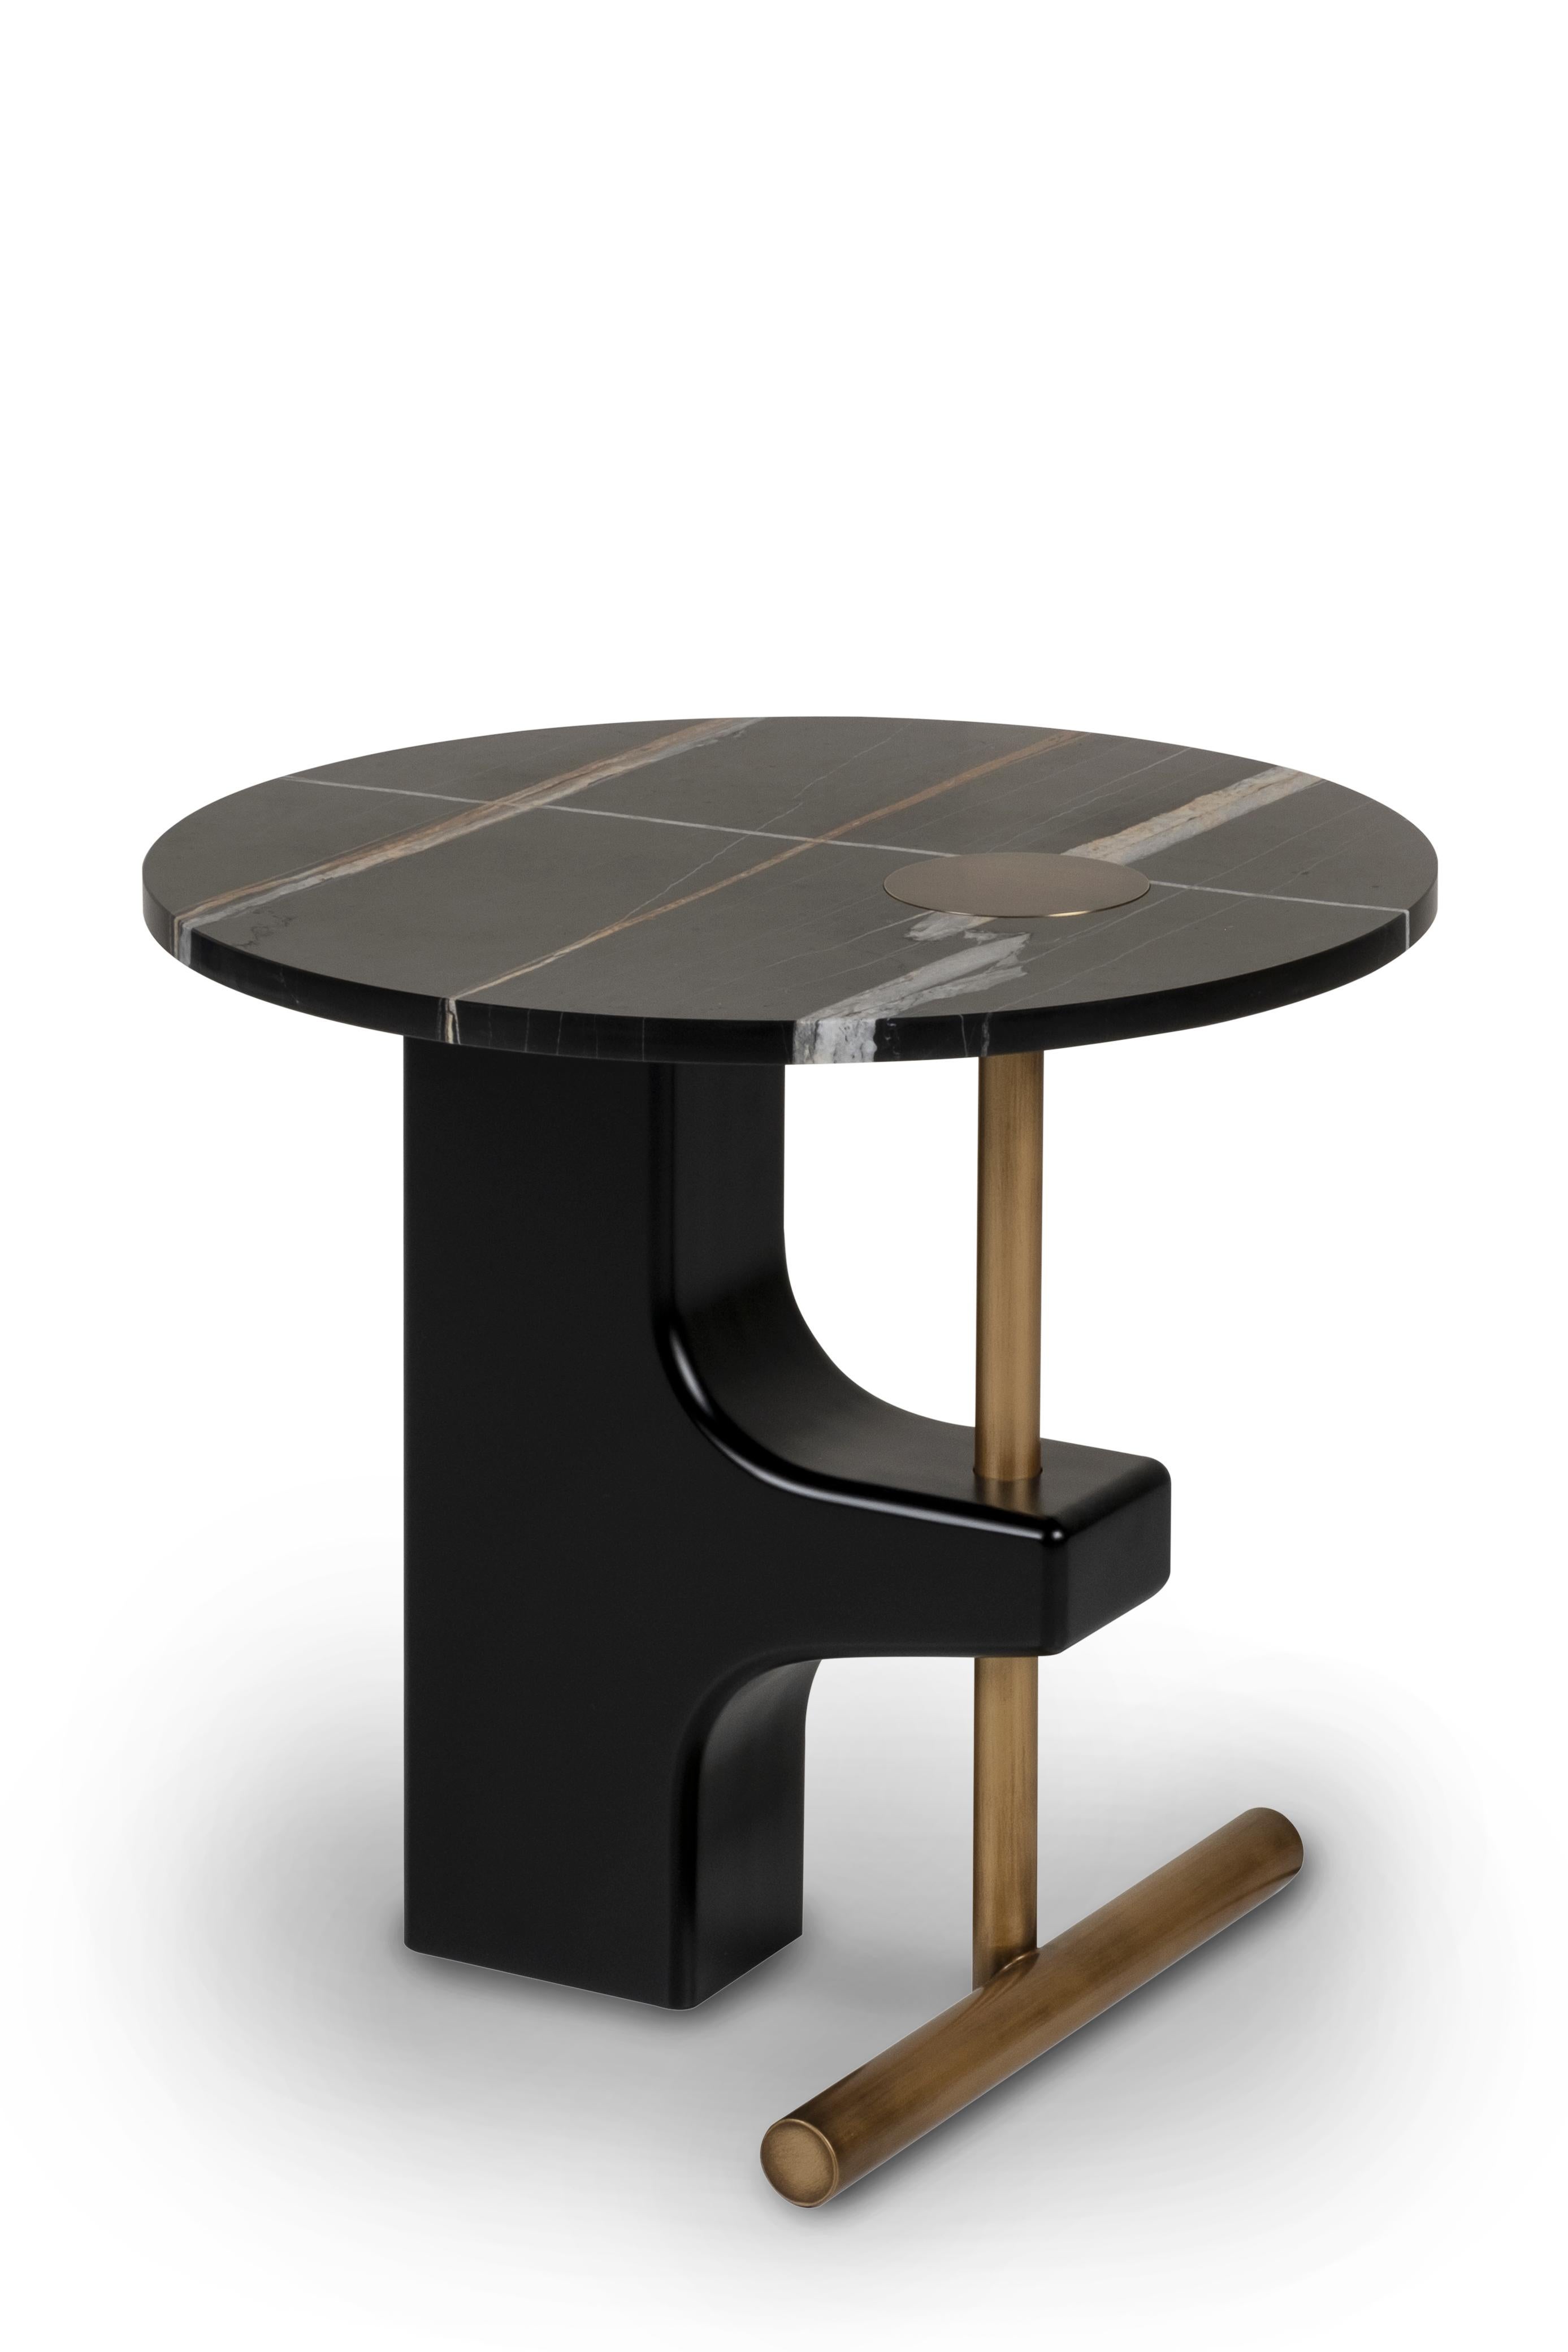 Contemporary Modern Mó Coffee Table, Sahara Noir Marble, Handmade in Portugal by Greenapple For Sale